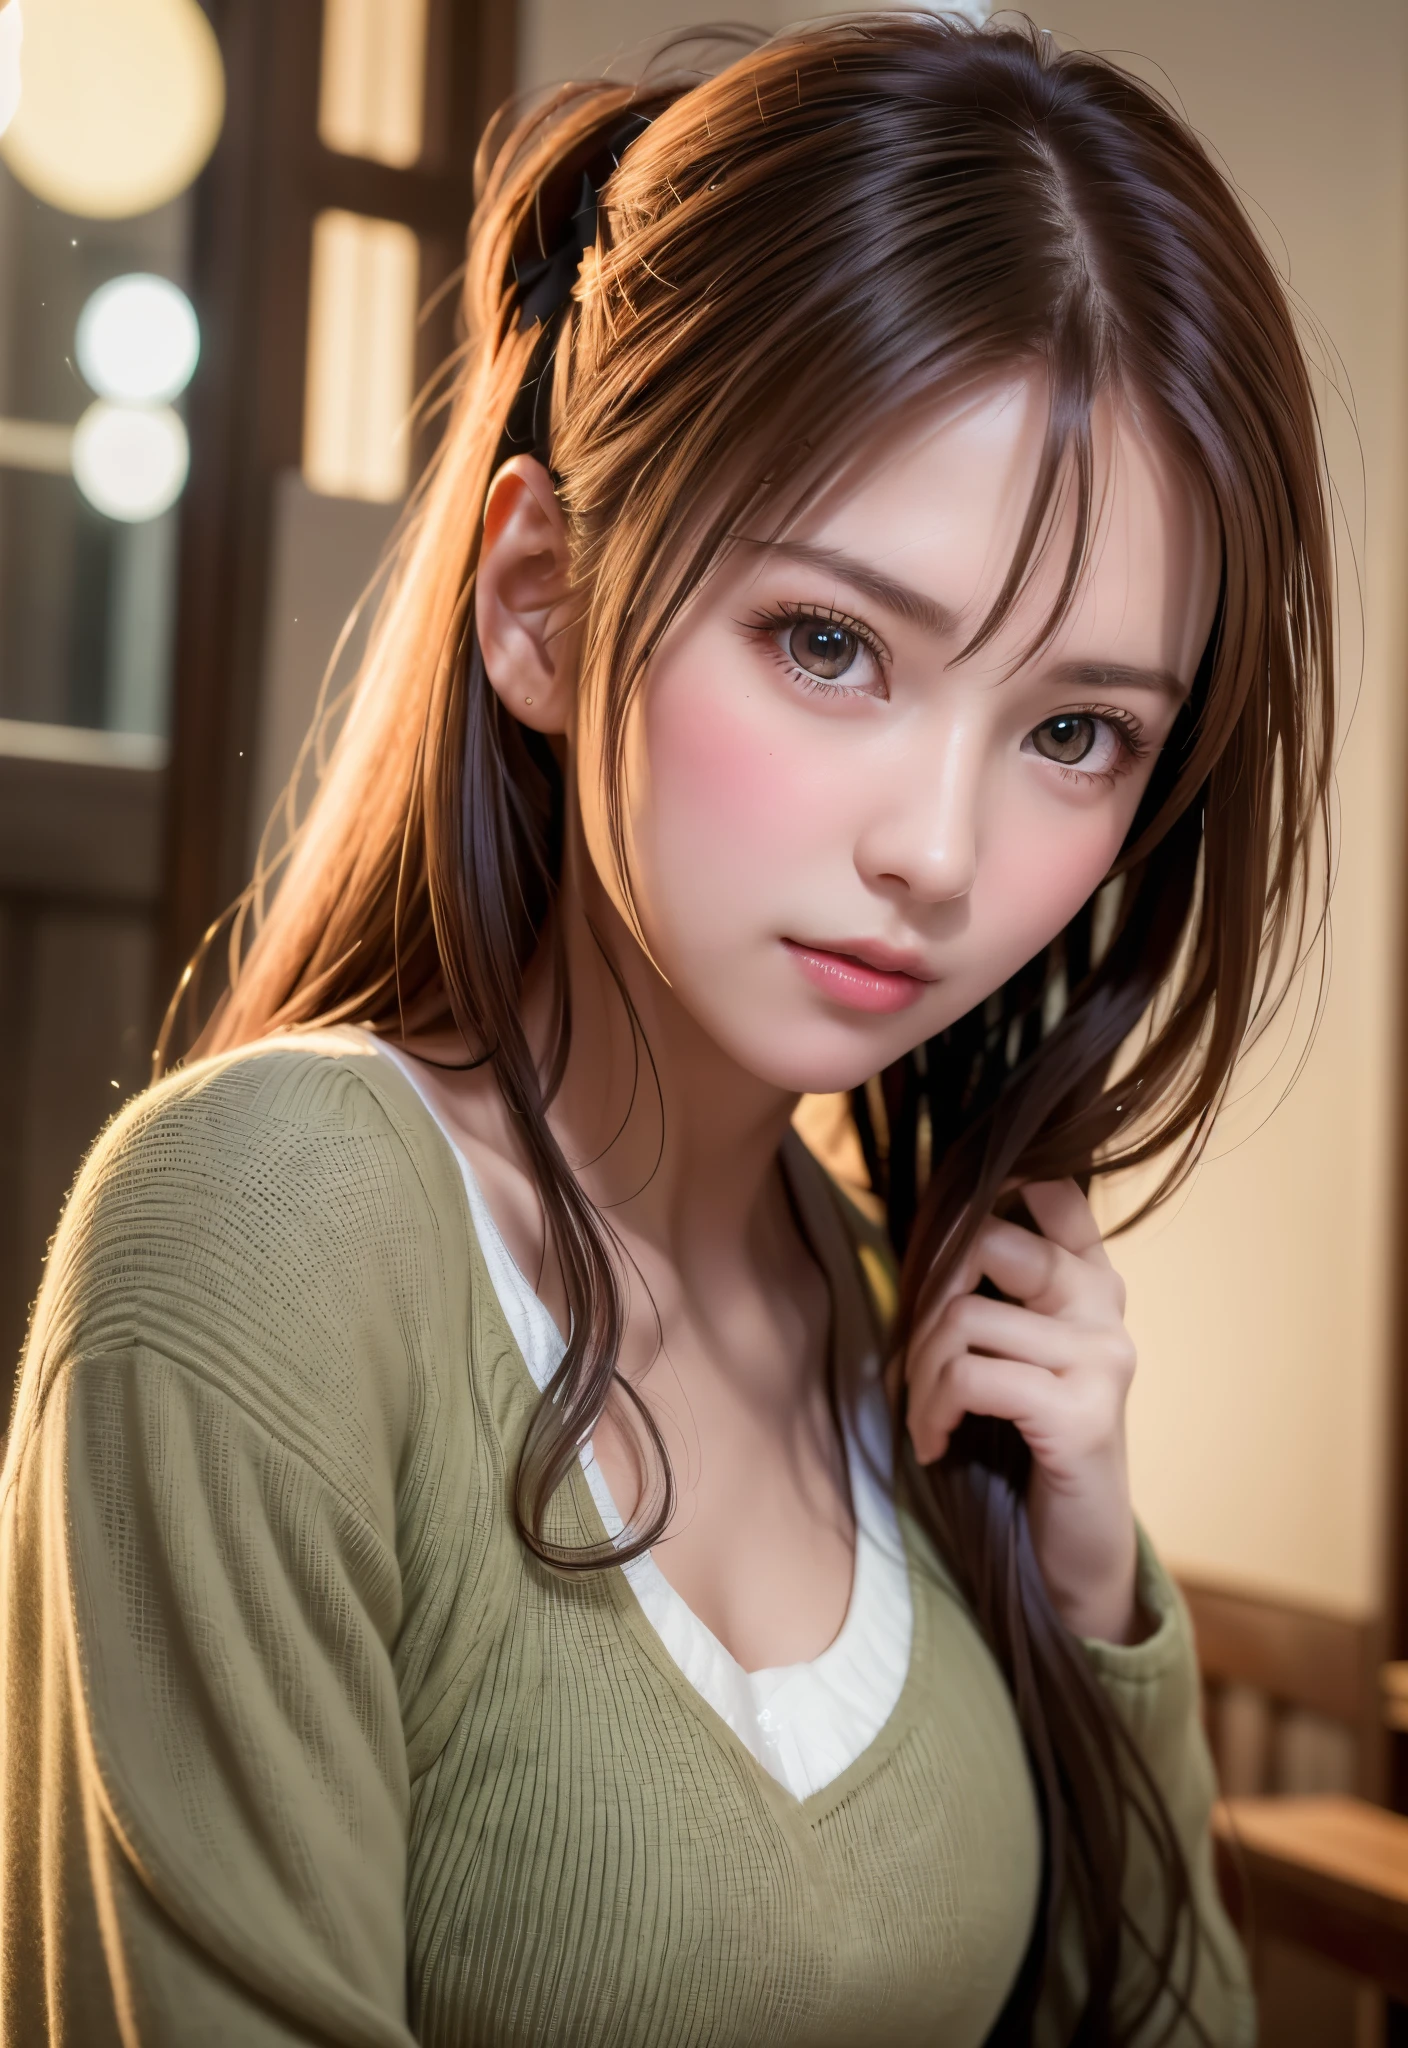 8K, of the highest quality, masutepiece:1.2), (Realistic, Photorealsitic:1.37), of the highest quality, masutepiece, Beautiful young woman, Pensive expression,、A charming、and an inviting look, cute santa clothes, Hair tied back, Cinematic background, Light skin tone